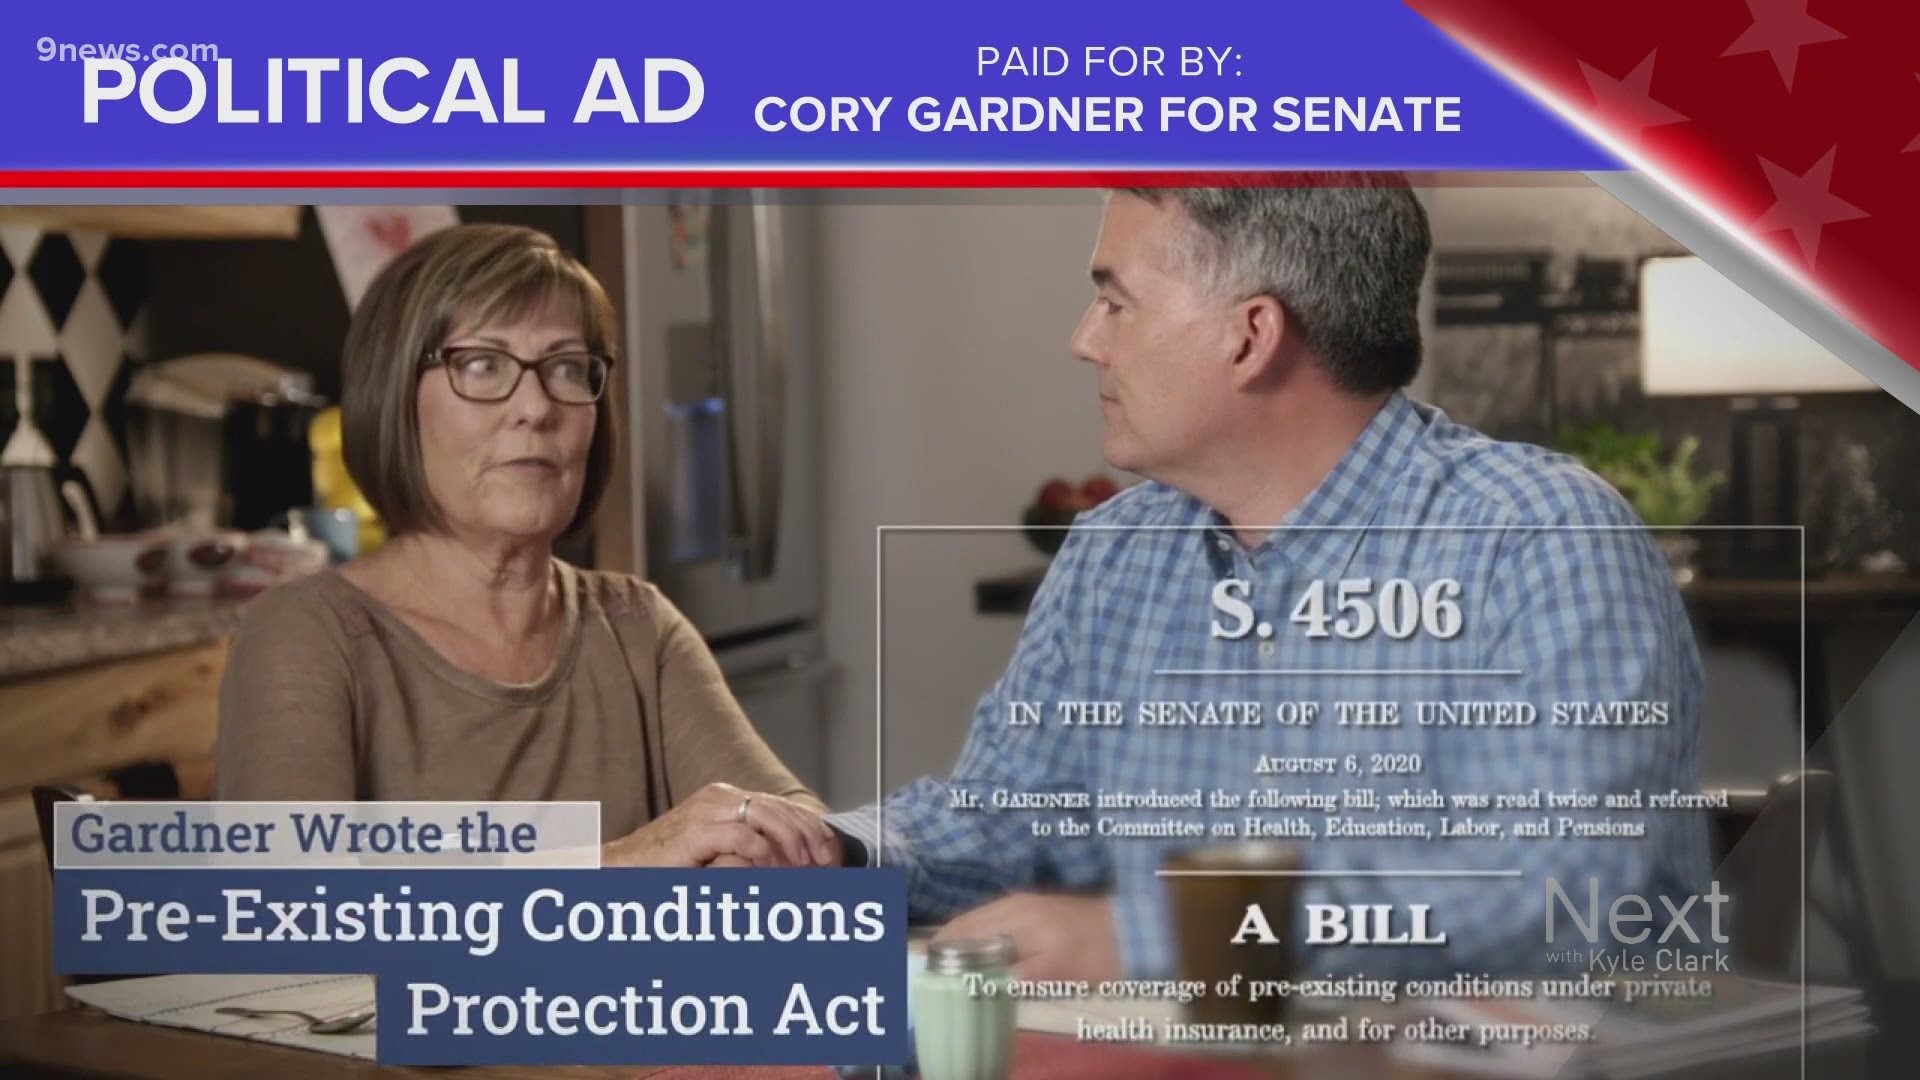 Sen. Cory Gardner's new ad features his mom, a cancer survivor, who says her son's bill protects preexisting conditions even without Obamacare. That needs context.